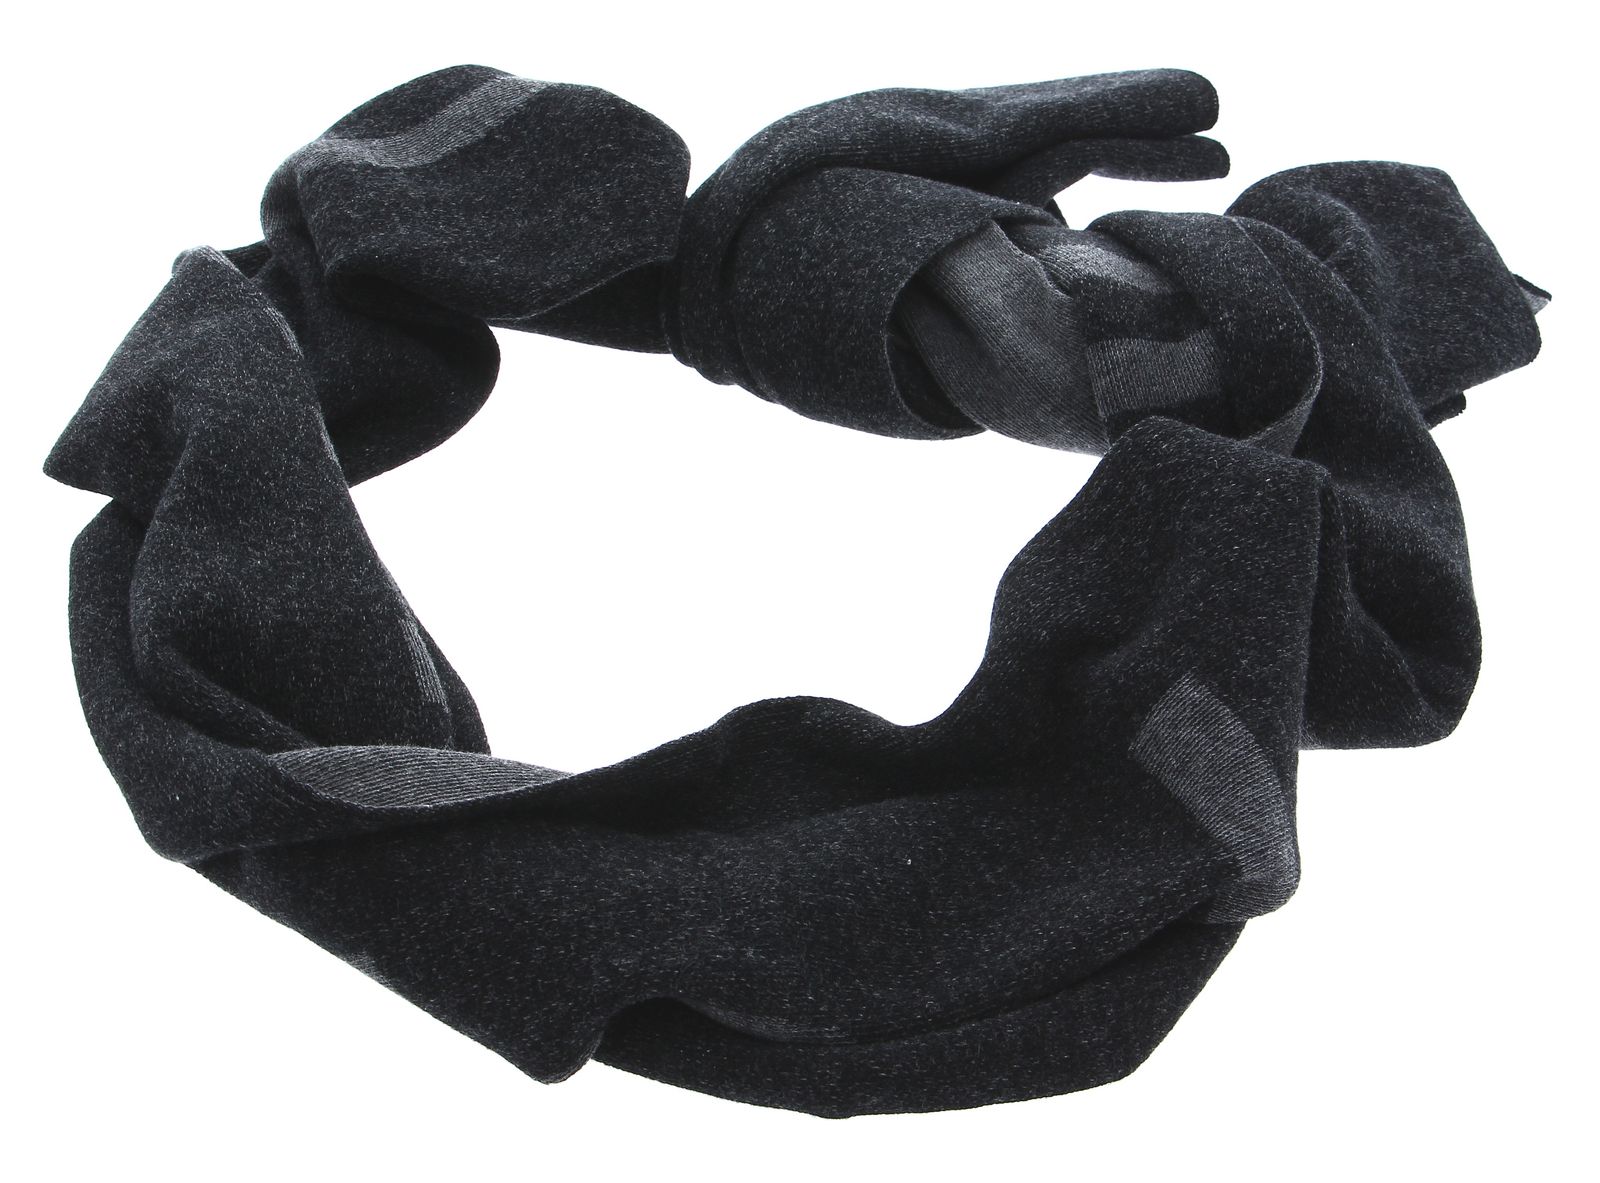 Buy Knitted Scarf accessories Klein CK | bags, Calvin scarf online Black modeherz & | purses